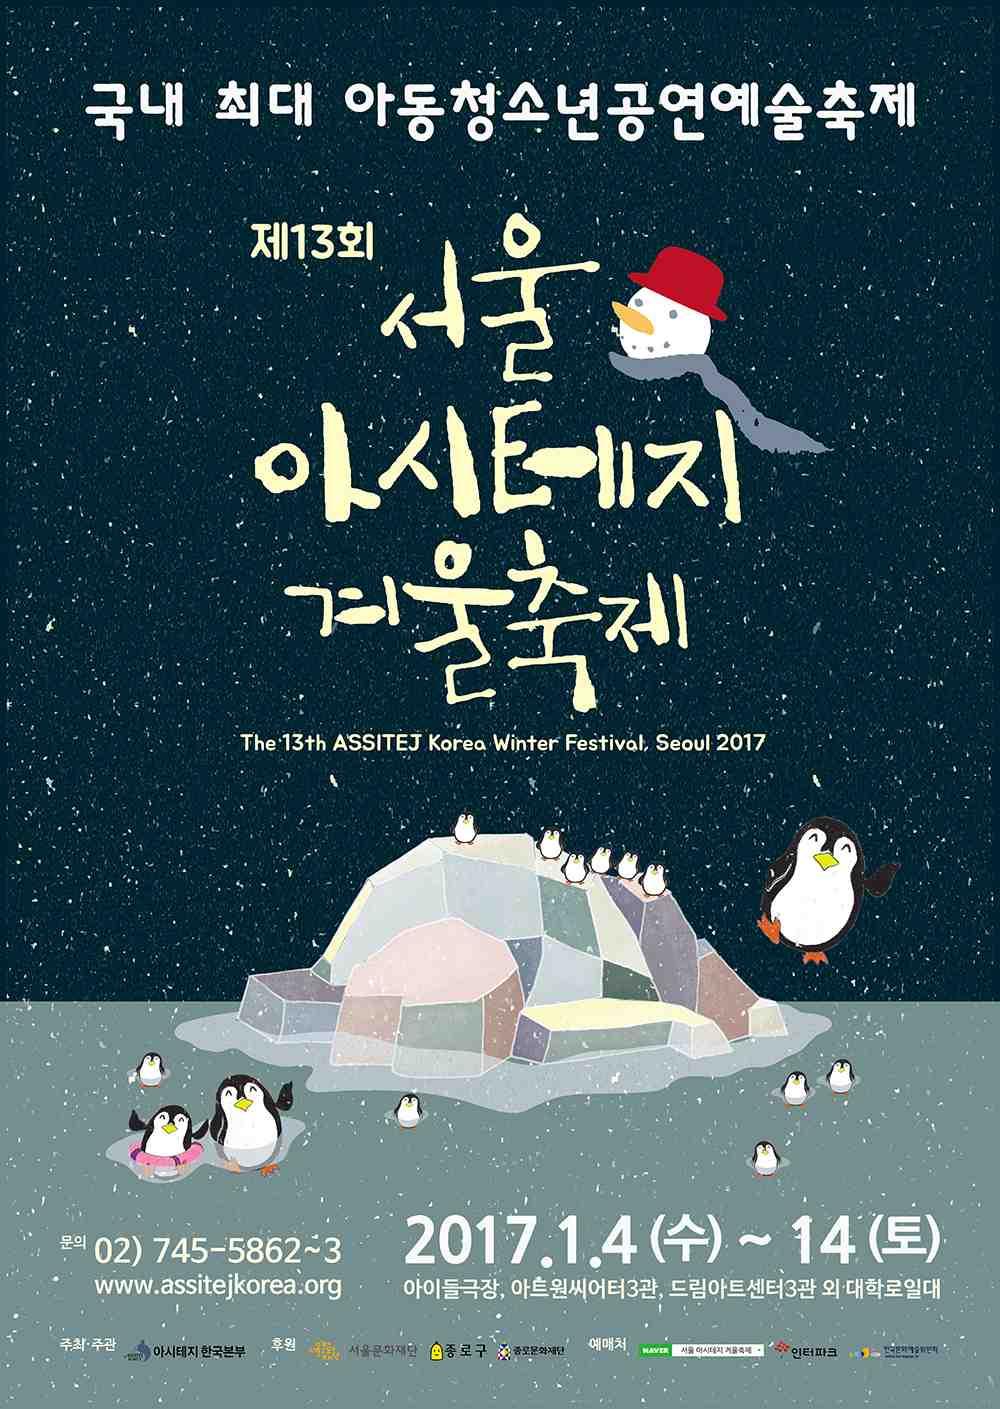 Festival Watch the Best Children s Plays from 2016! The 13th ASSISTEJ Korea Winter Festival Place Jan. 4 (Wed) ~ Jan.